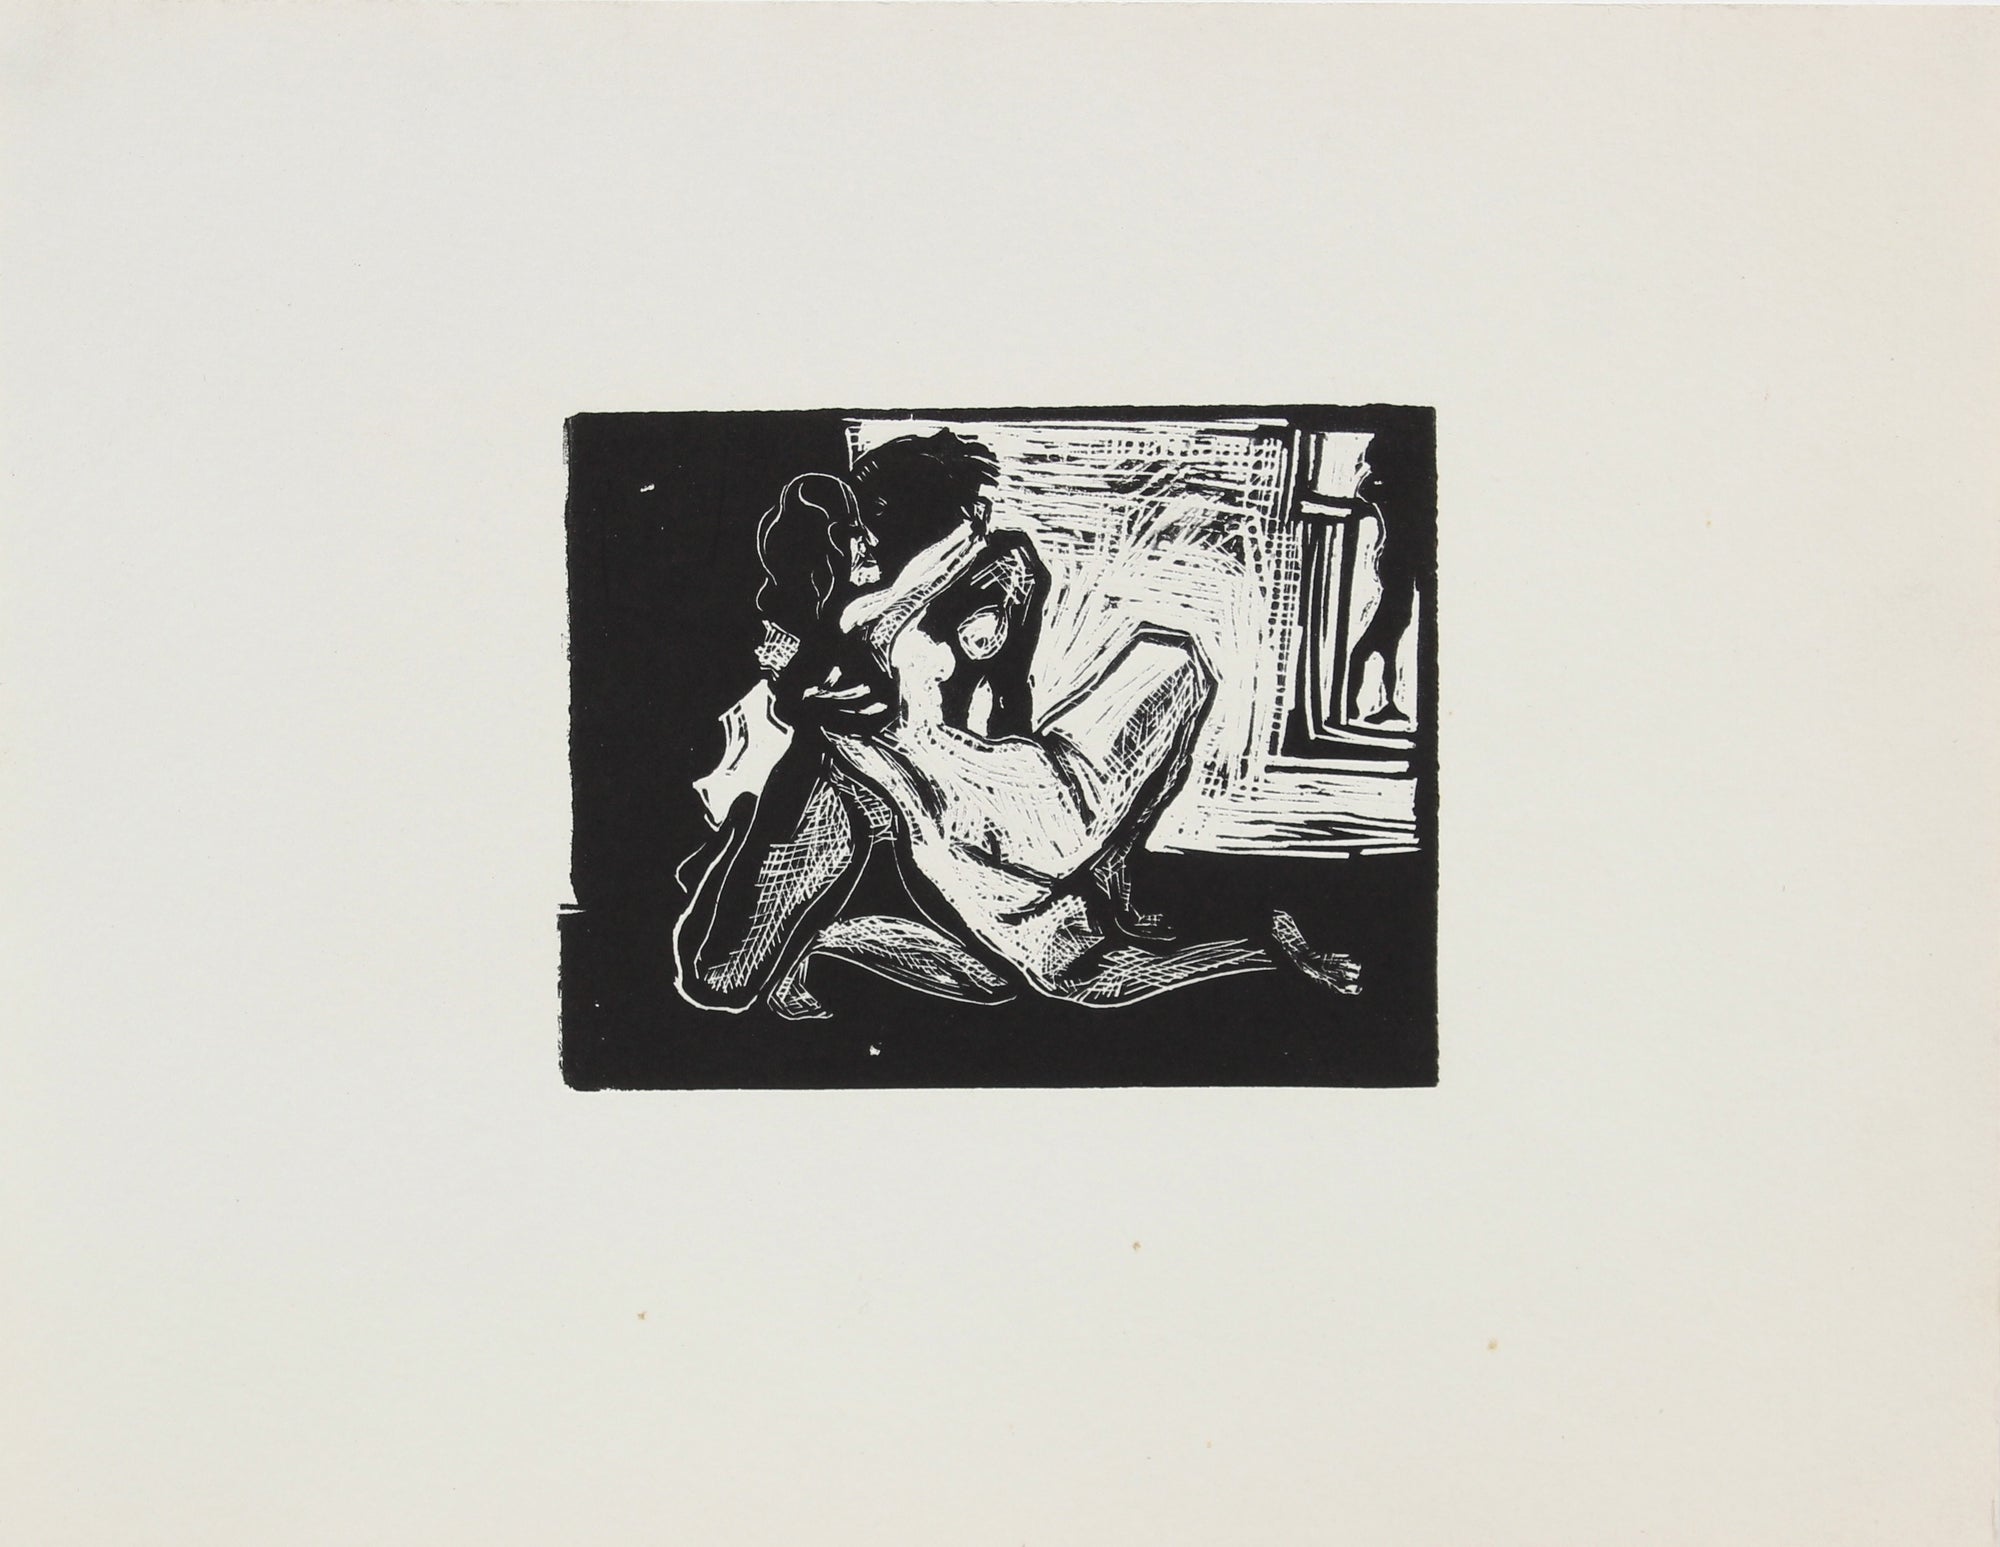 Nudes in Embrace <br>Woodcut, 1960-70s <br><br>#2233A